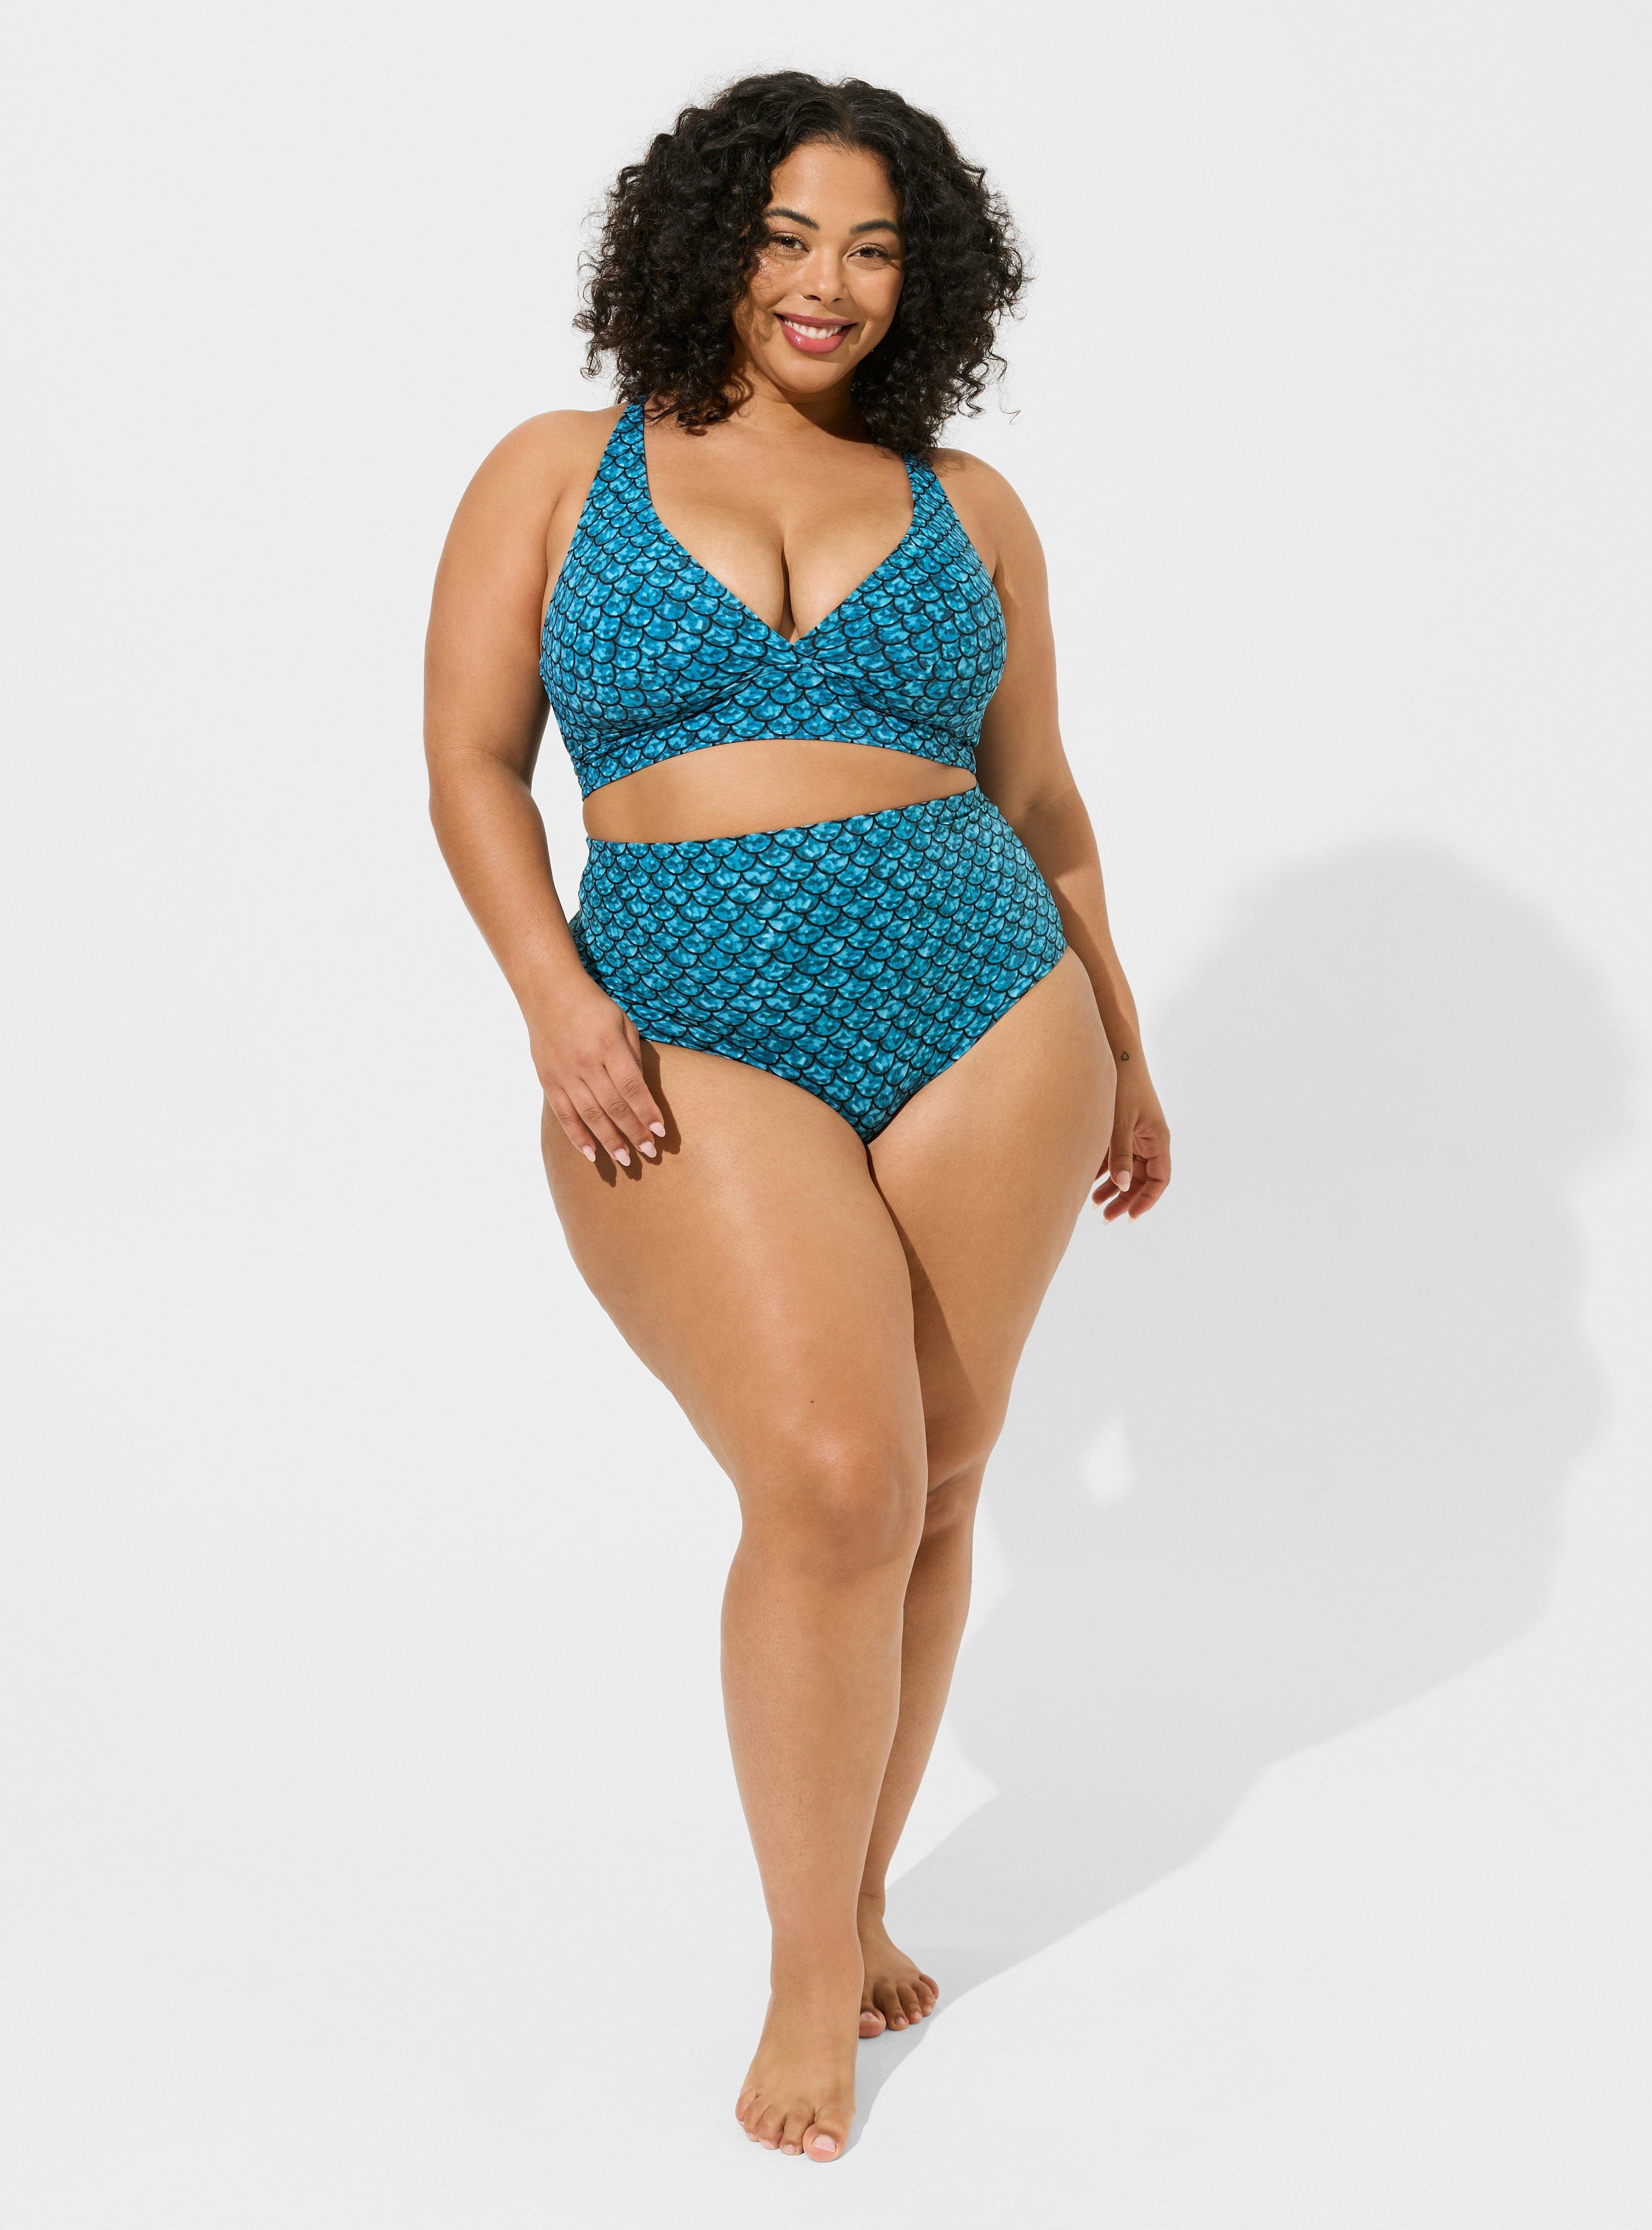 Pacific Vibes Teal Blue Sparkly String Bikini Top